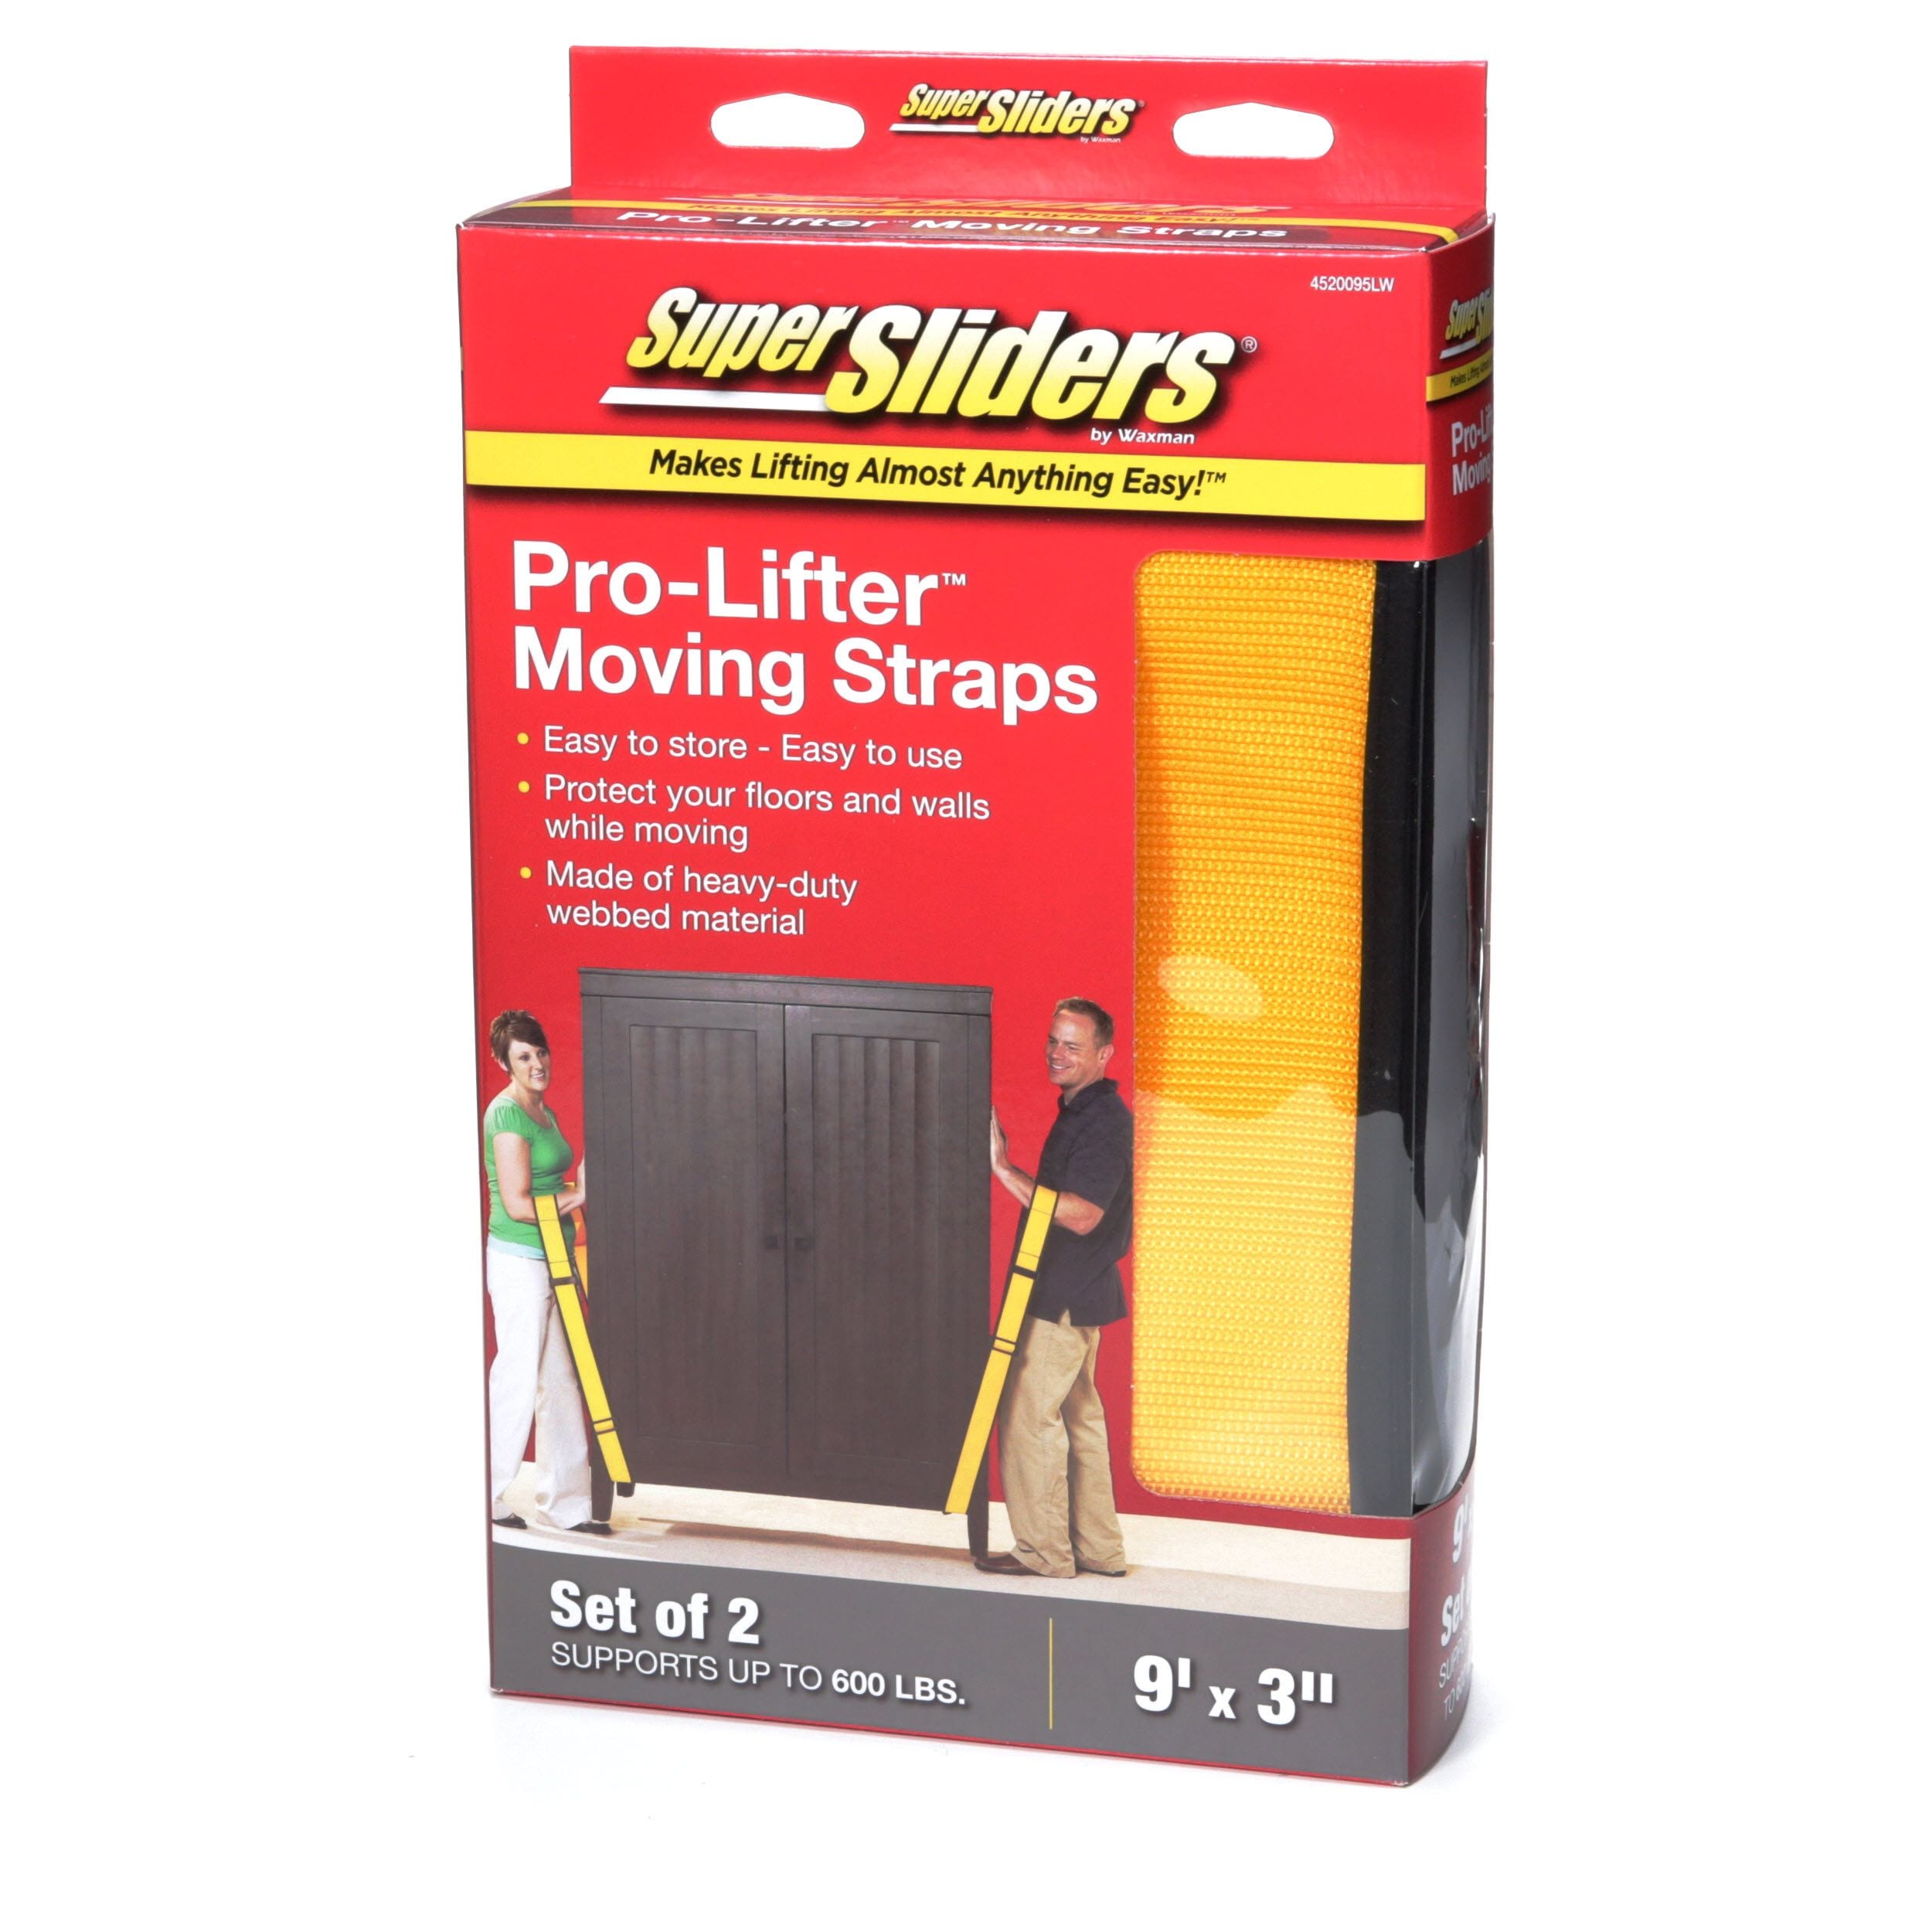 SuperSliders Pro-Lifter Moving and Lifting Straps Waxman 4520095N 